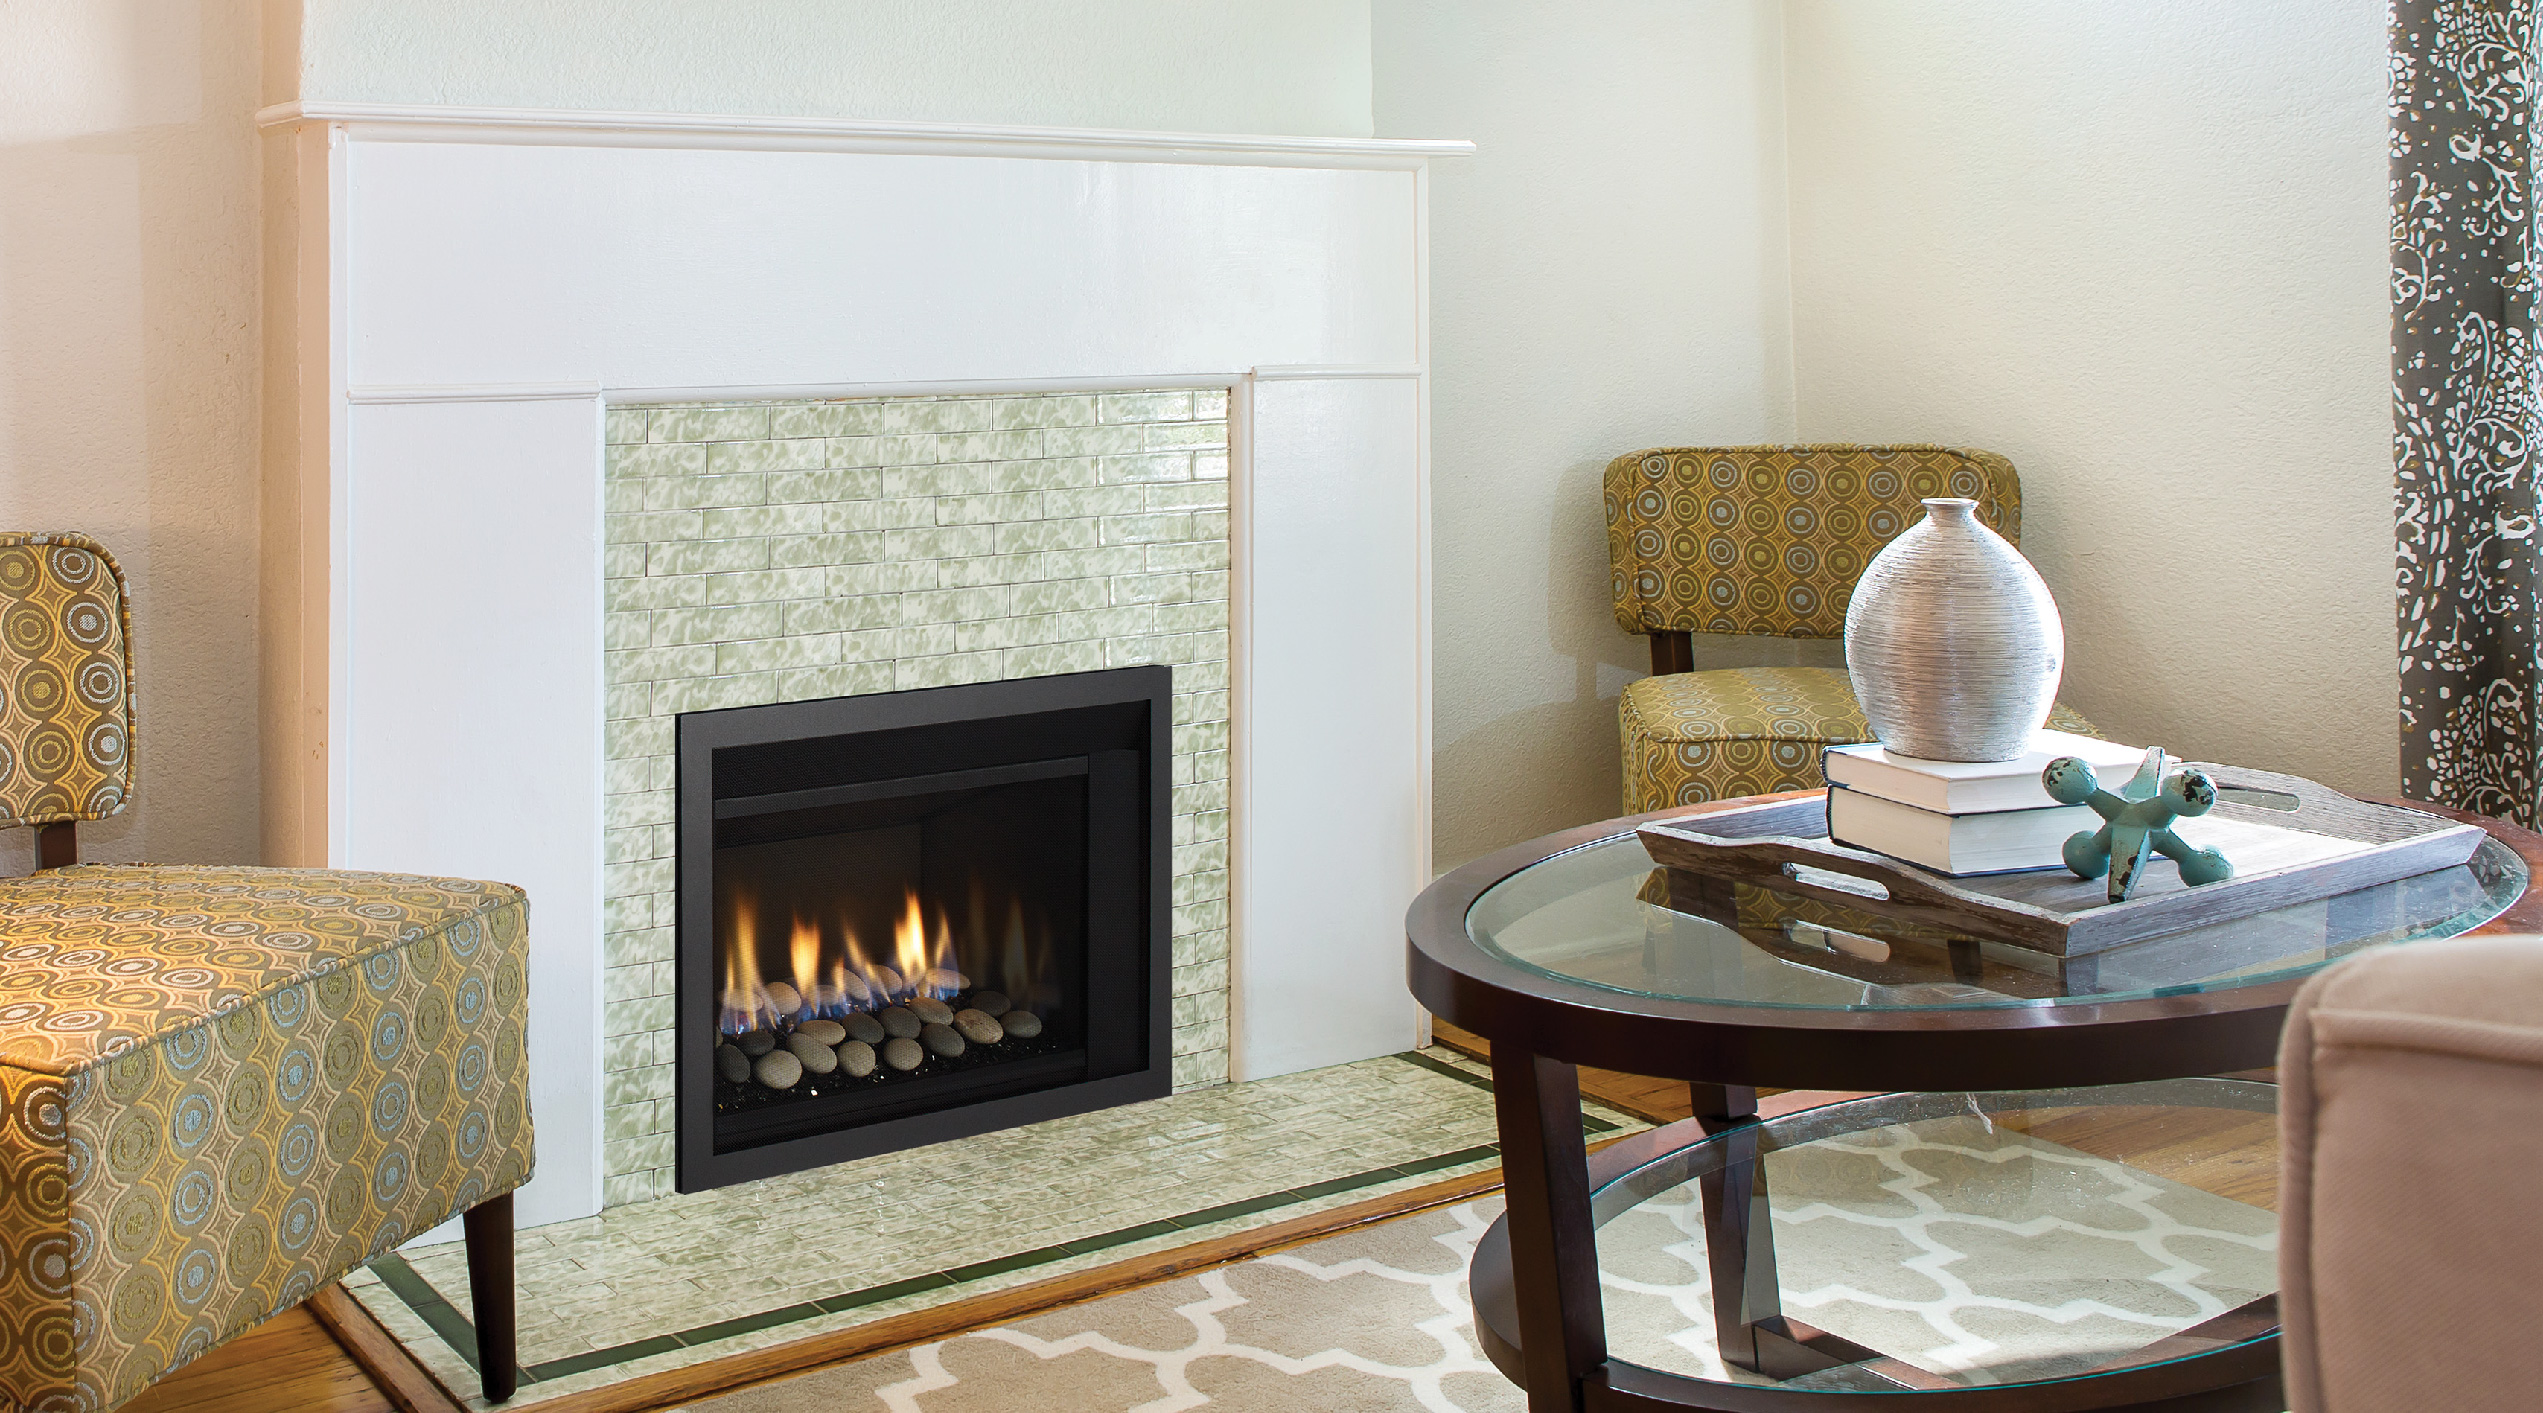 Regency HRI3E gas fireplace insert with multi-colored tile surround